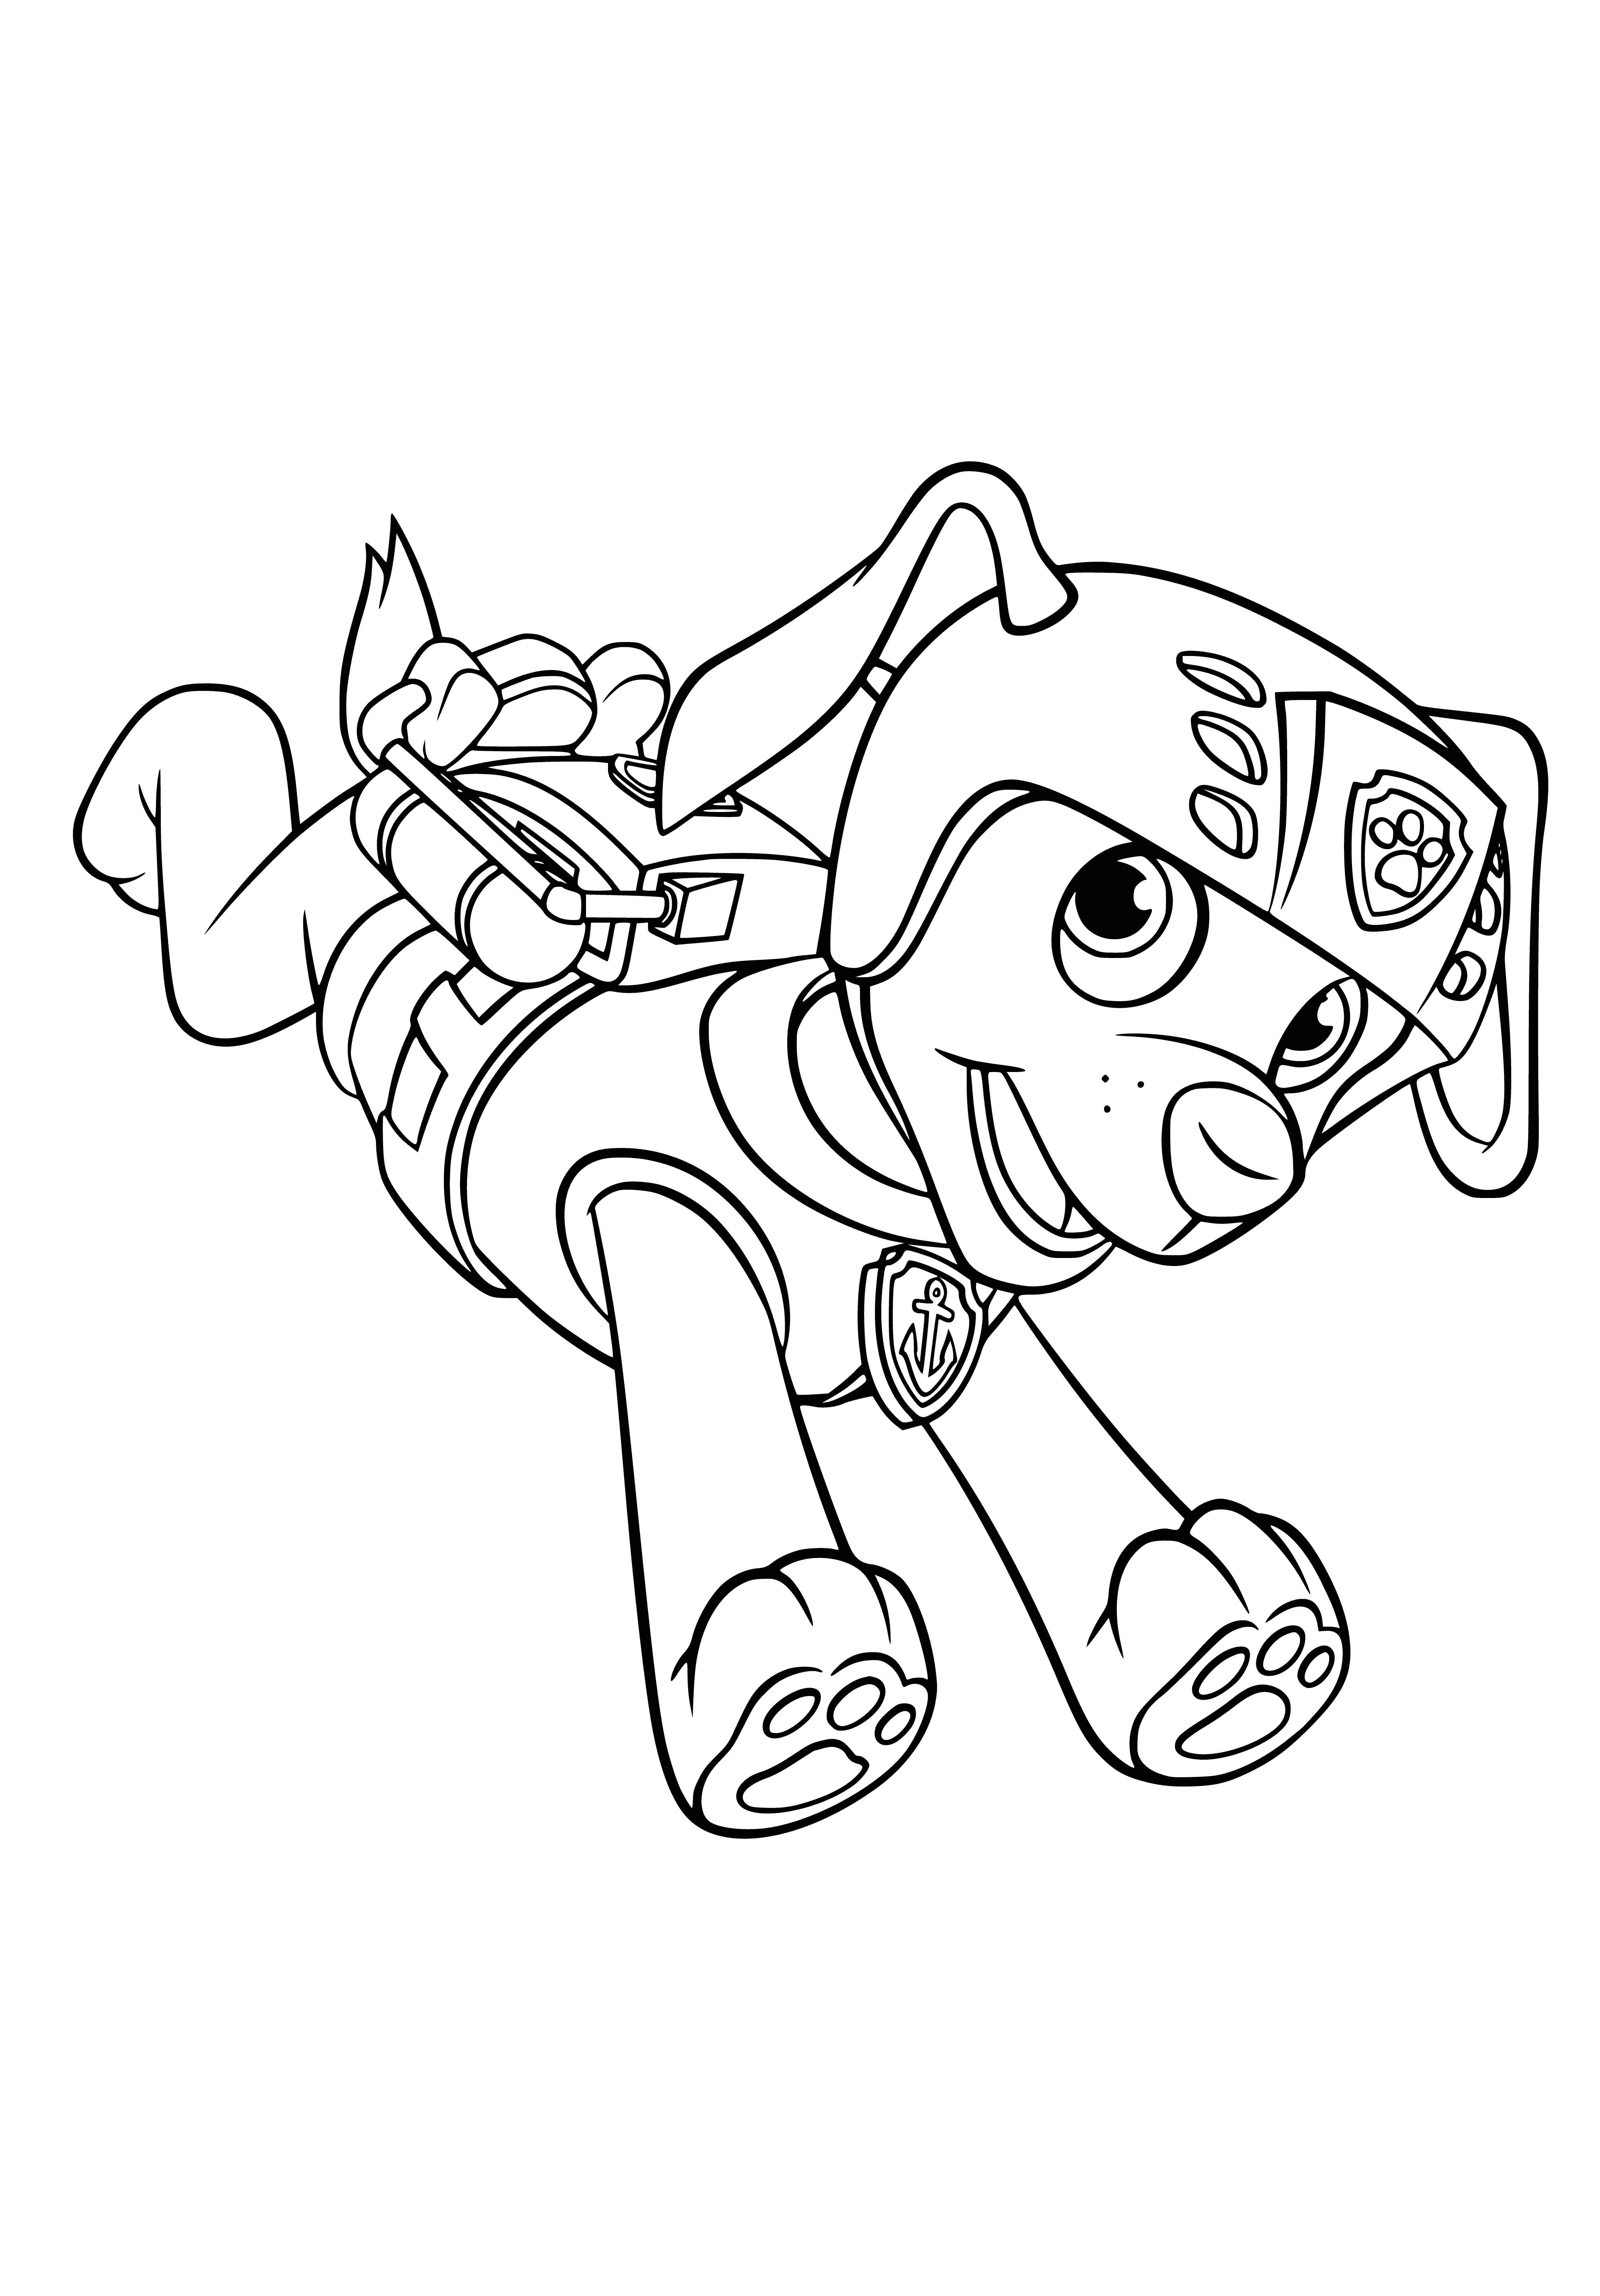 coloring page: Zuma is the PAW Patrol water rescue pup who uses his backpack and surfboard to save animals.